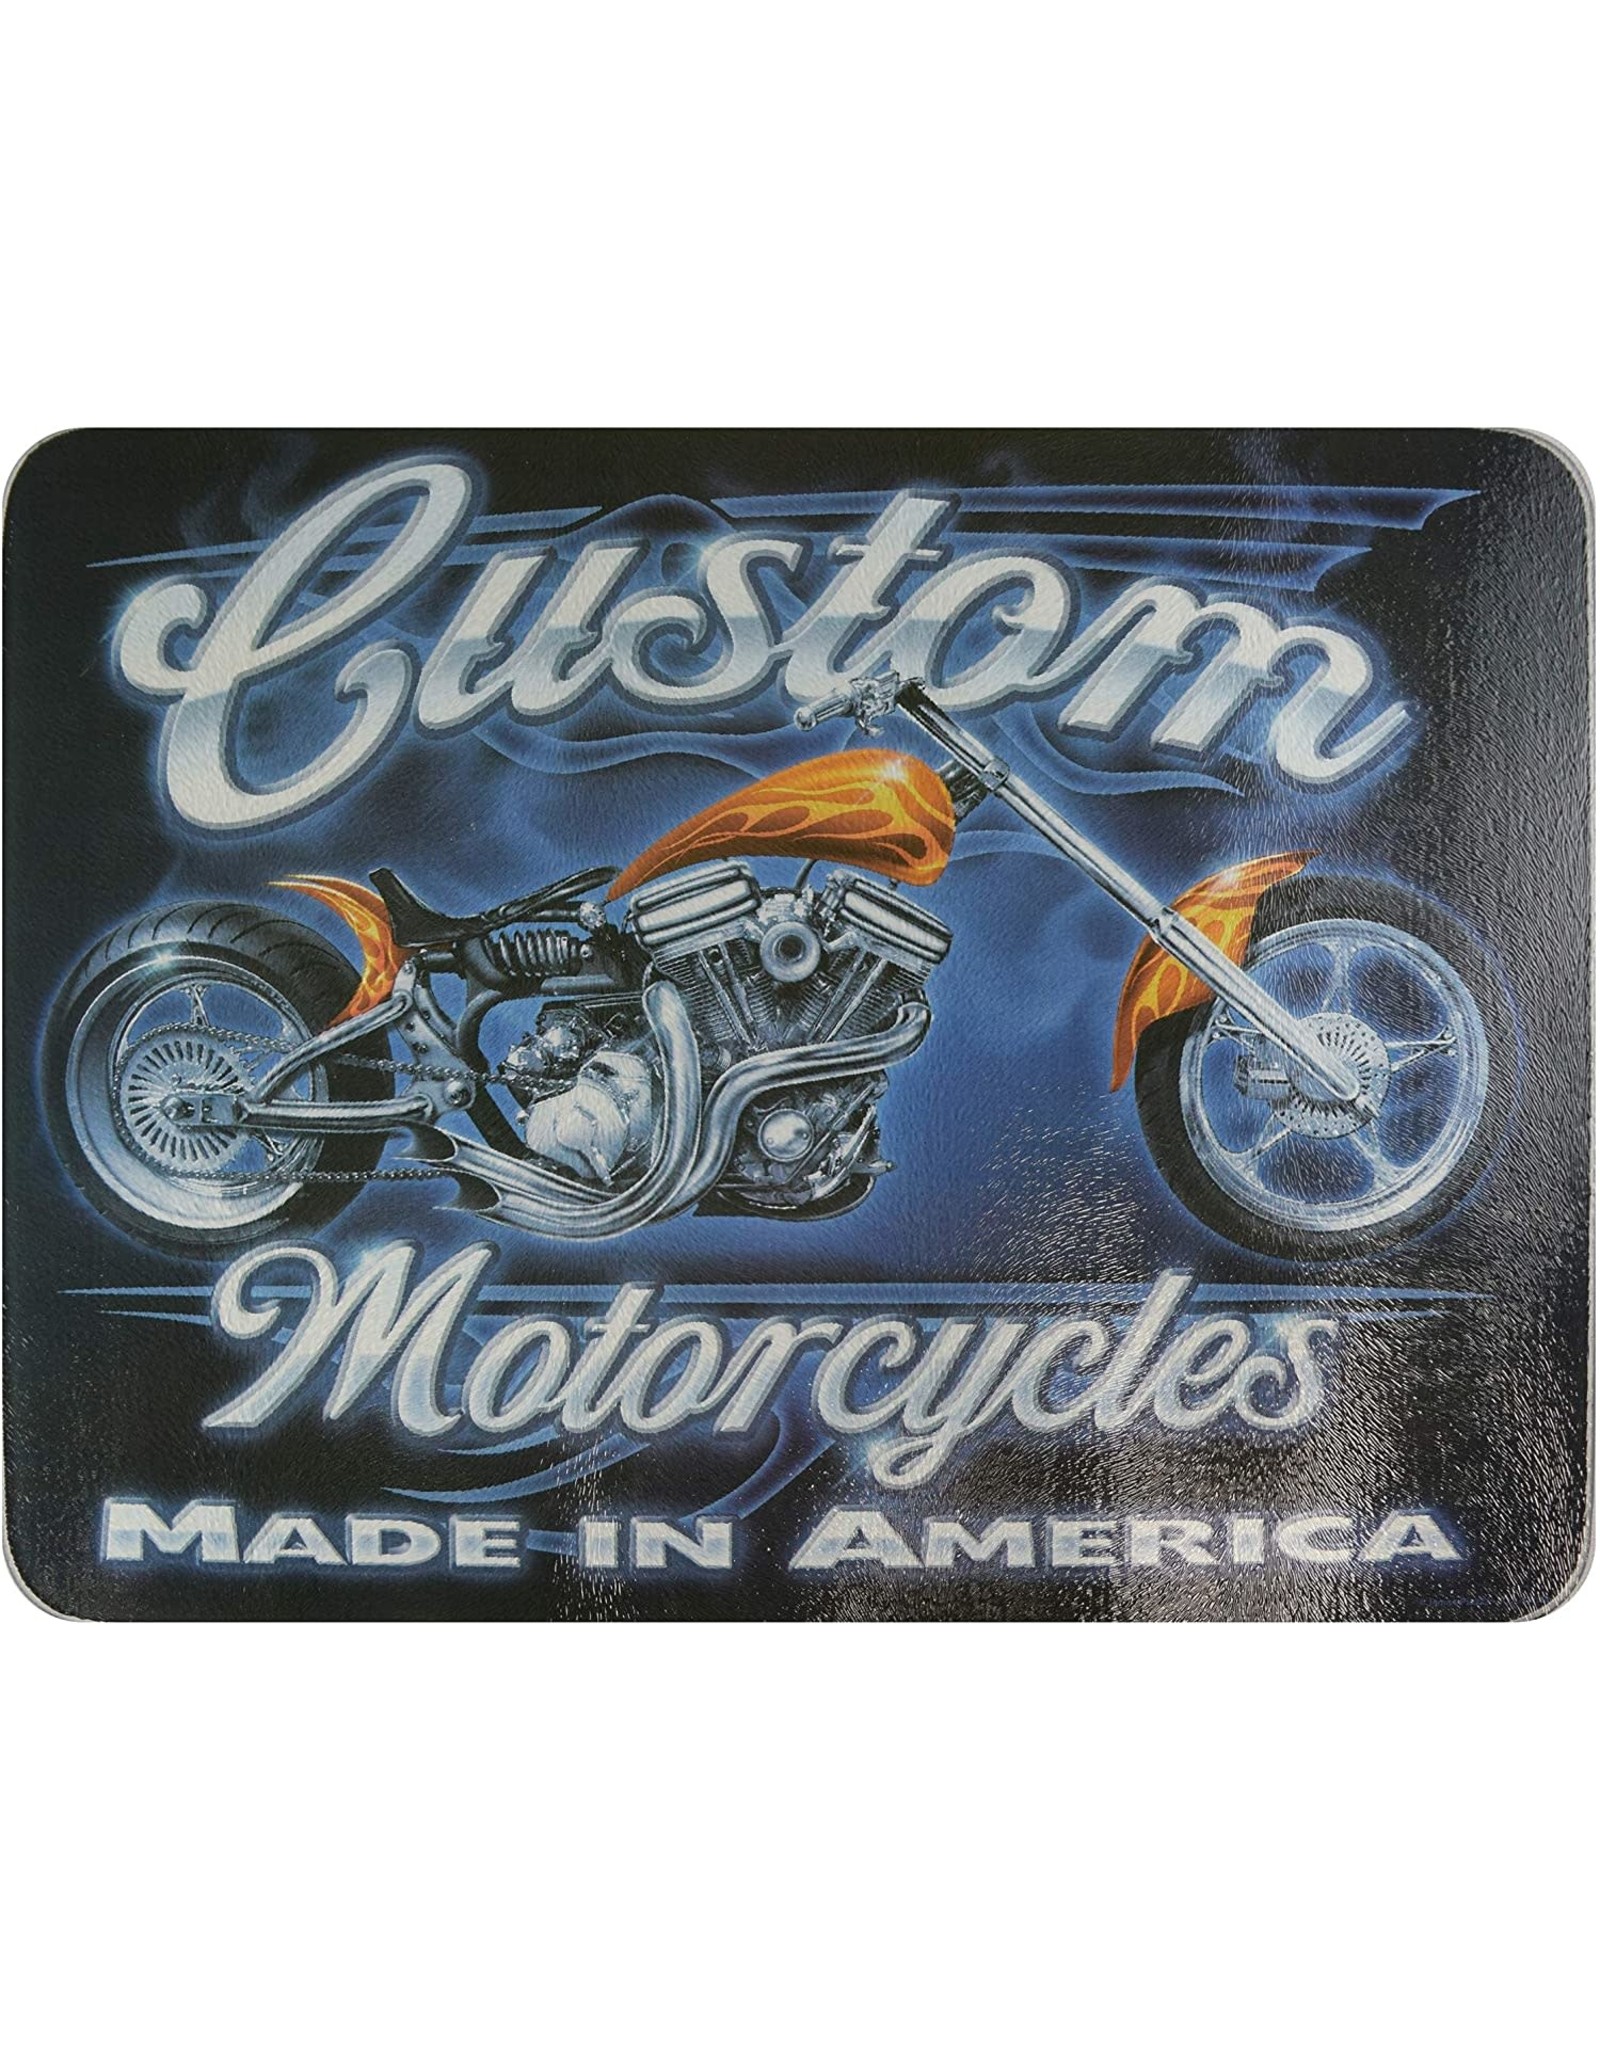 Rivers Edge Products Cutting Board 12in x 16in - Assorted Motorcycle